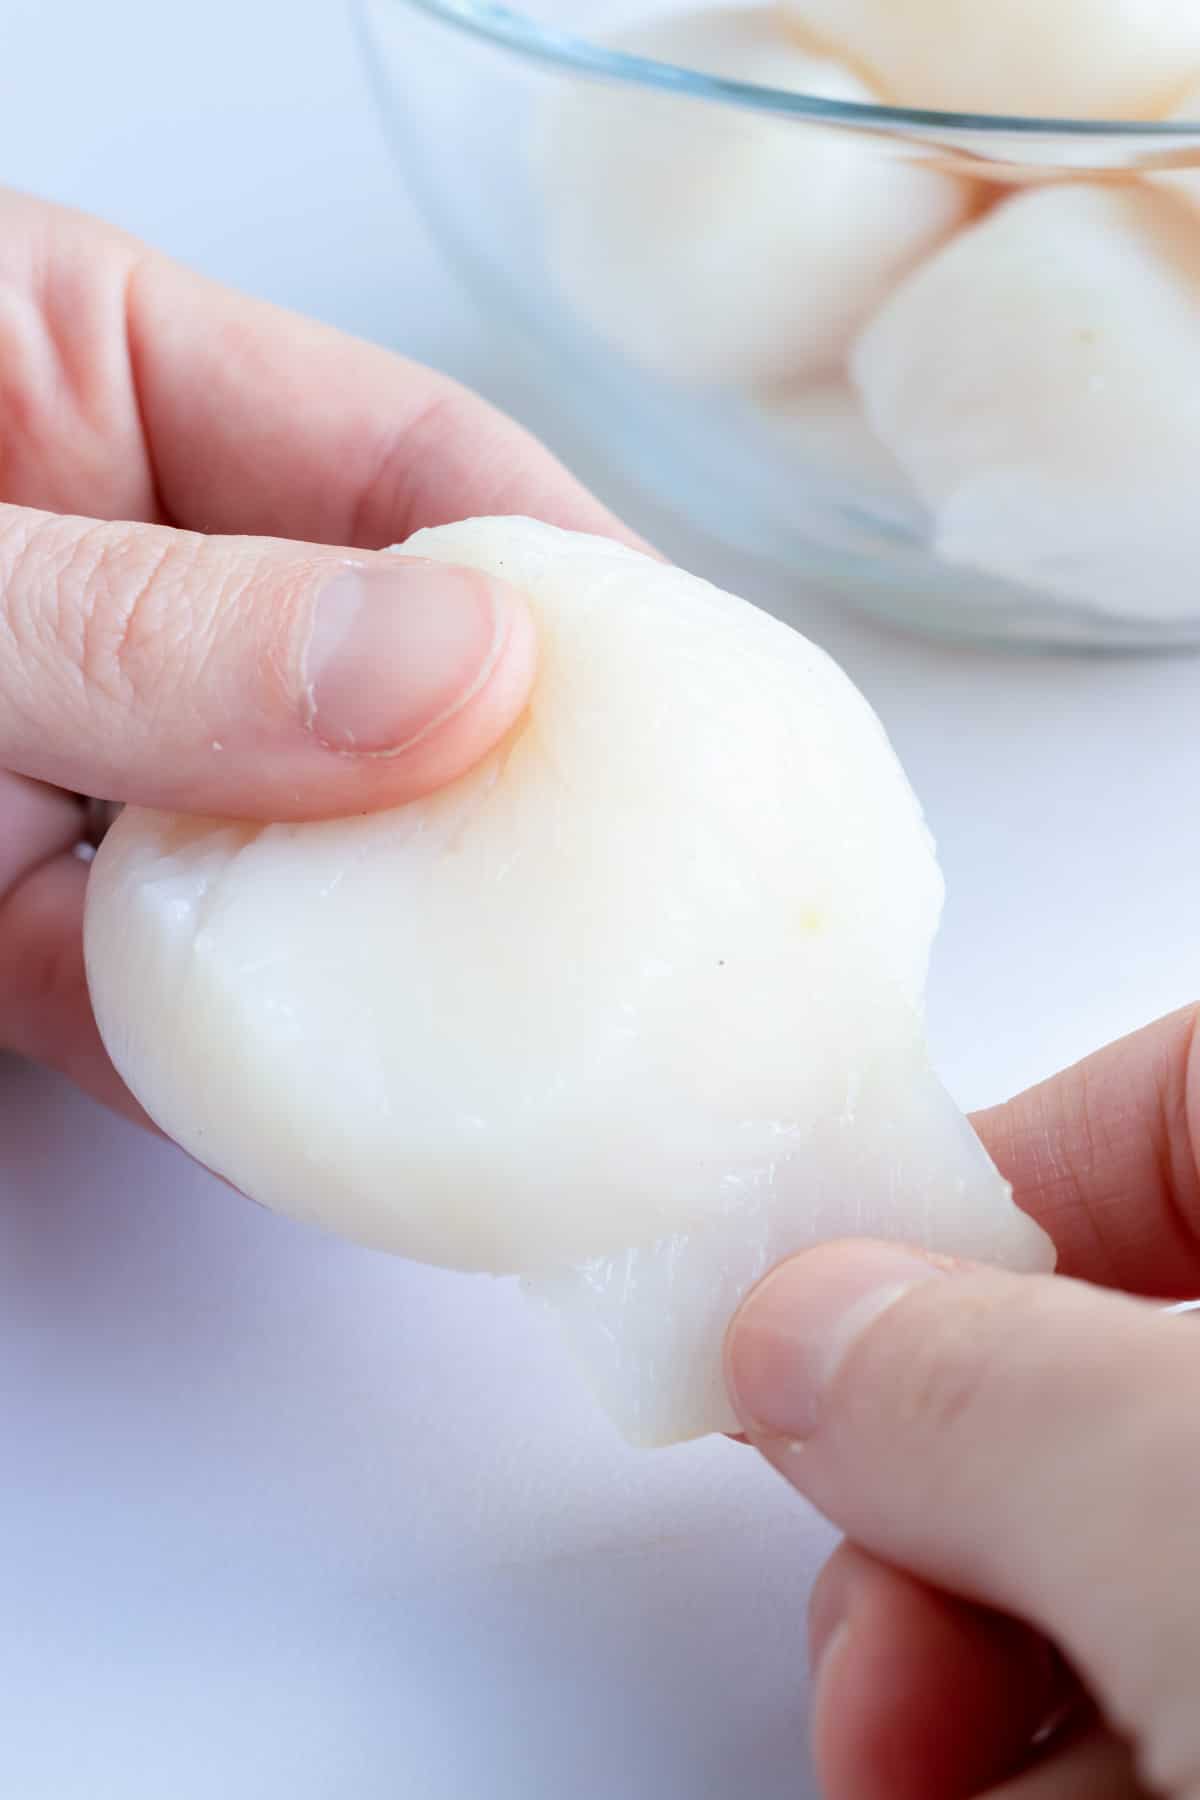 Removing the tendon from a scallop.